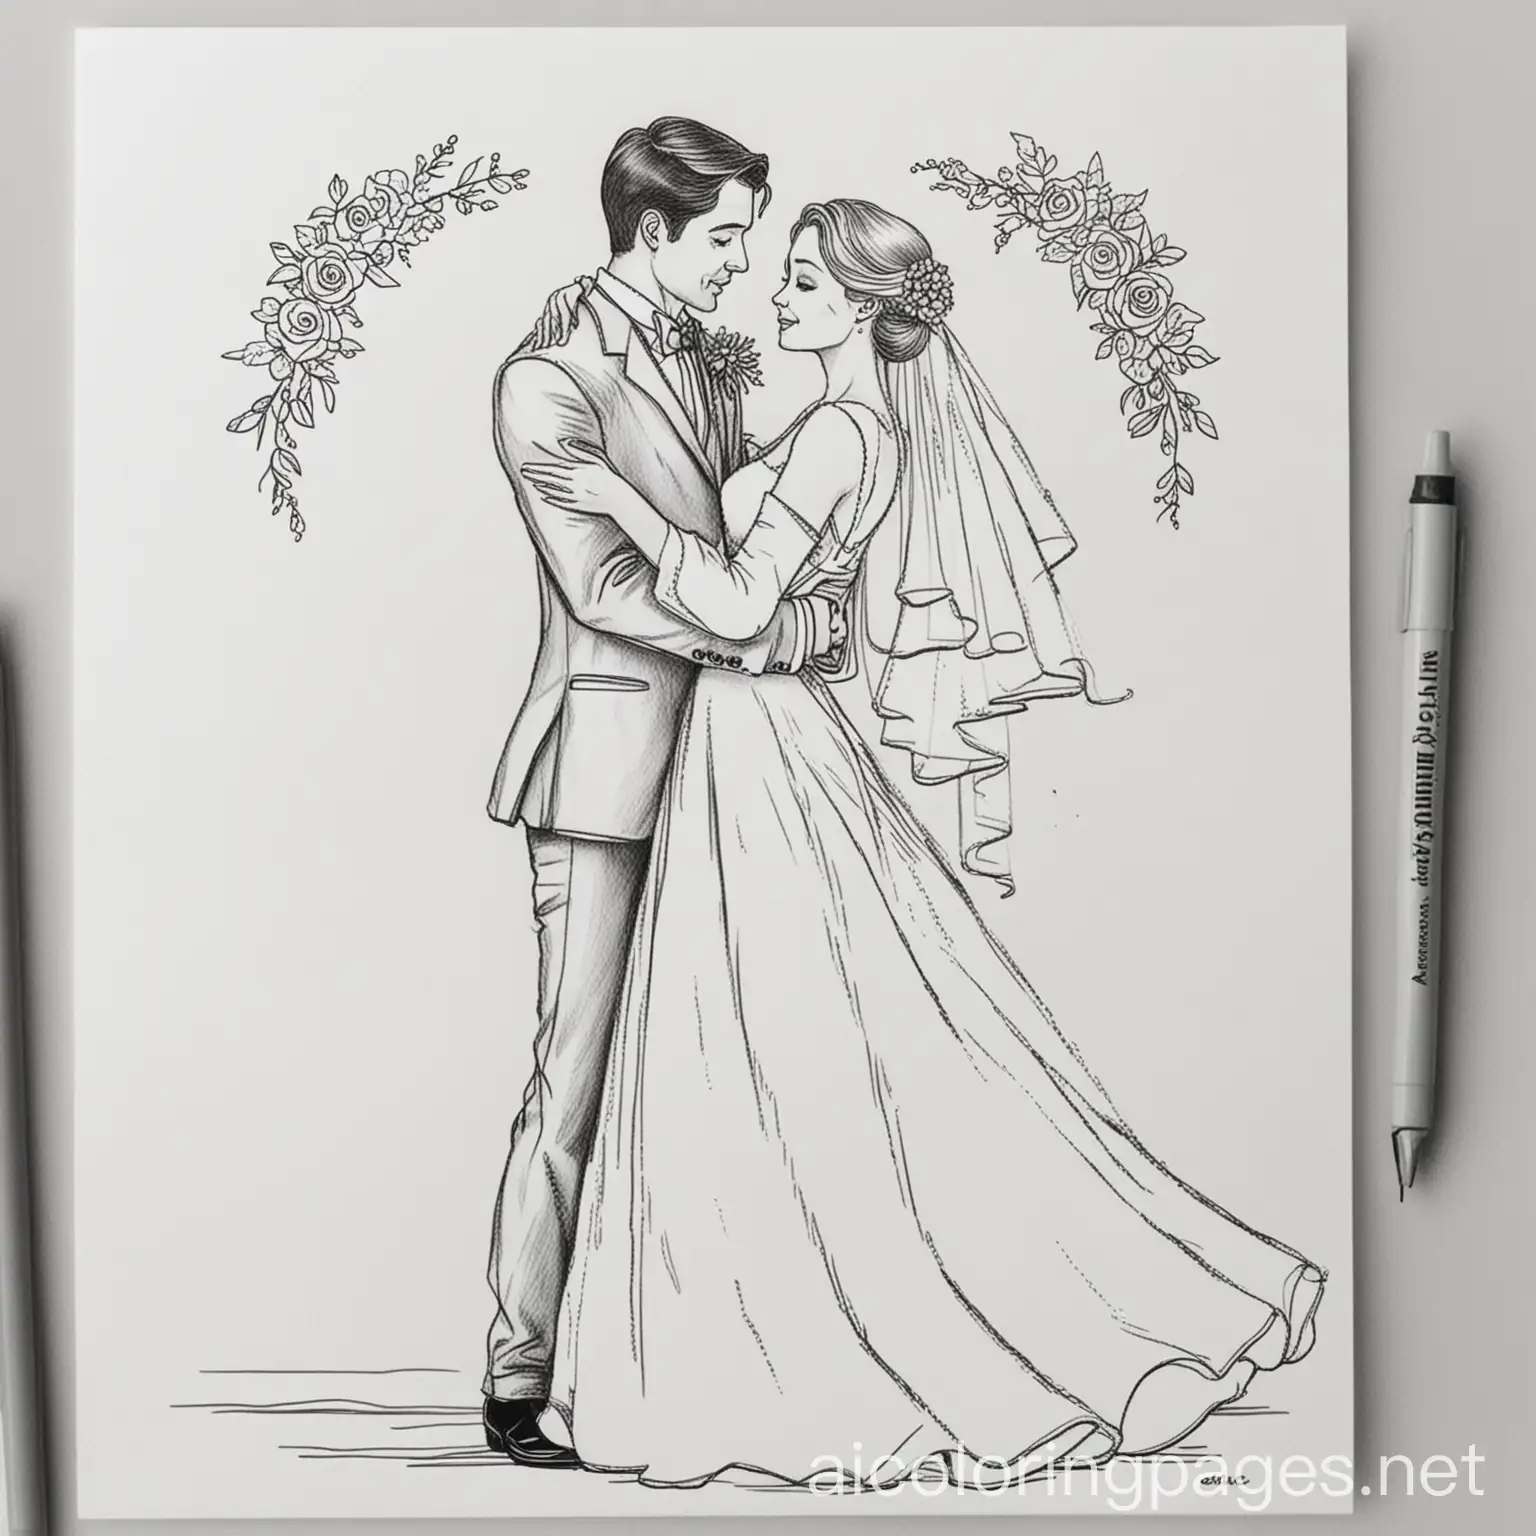 Bride and groom first dance, Coloring Page, black and white, line art, white background, Simplicity, Ample White Space. The background of the coloring page is plain white to make it easy for young children to color within the lines. The outlines of all the subjects are easy to distinguish, making it simple for kids to color without too much difficulty